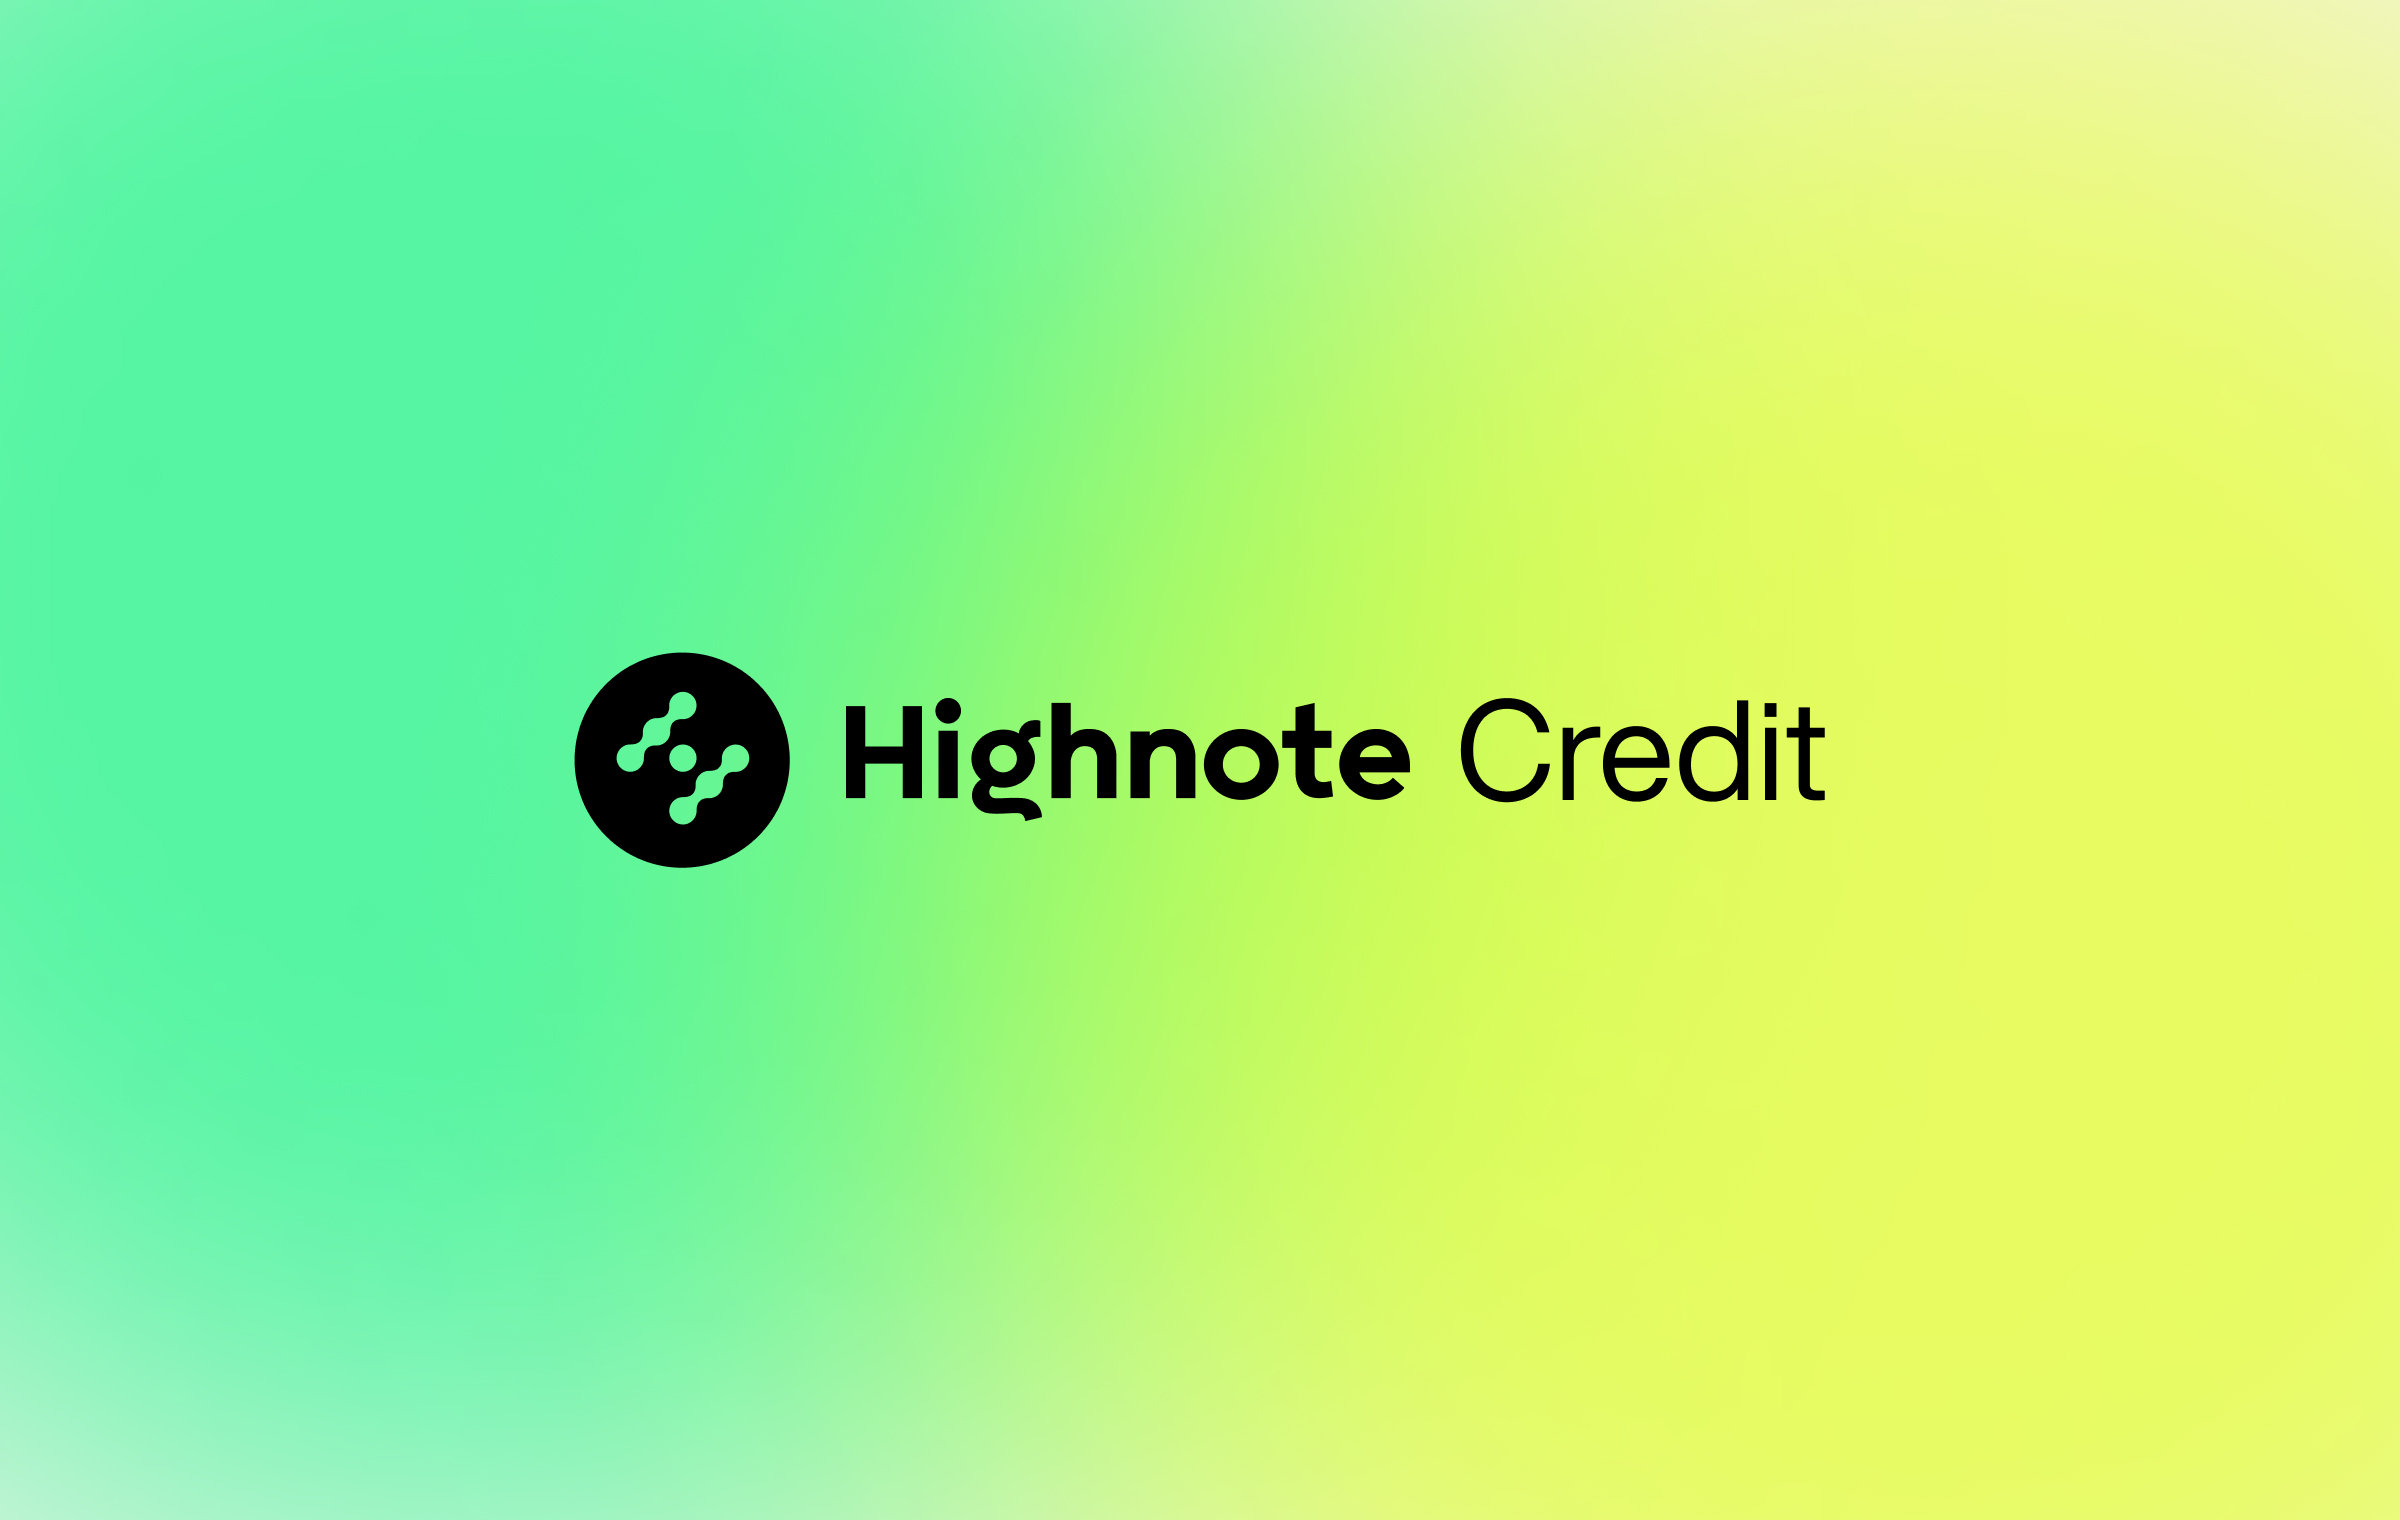 Setting the standard in payments, Highnote's modern platform and robust program management now support consumer credit capabilities to transform the end-to-end credit experience.